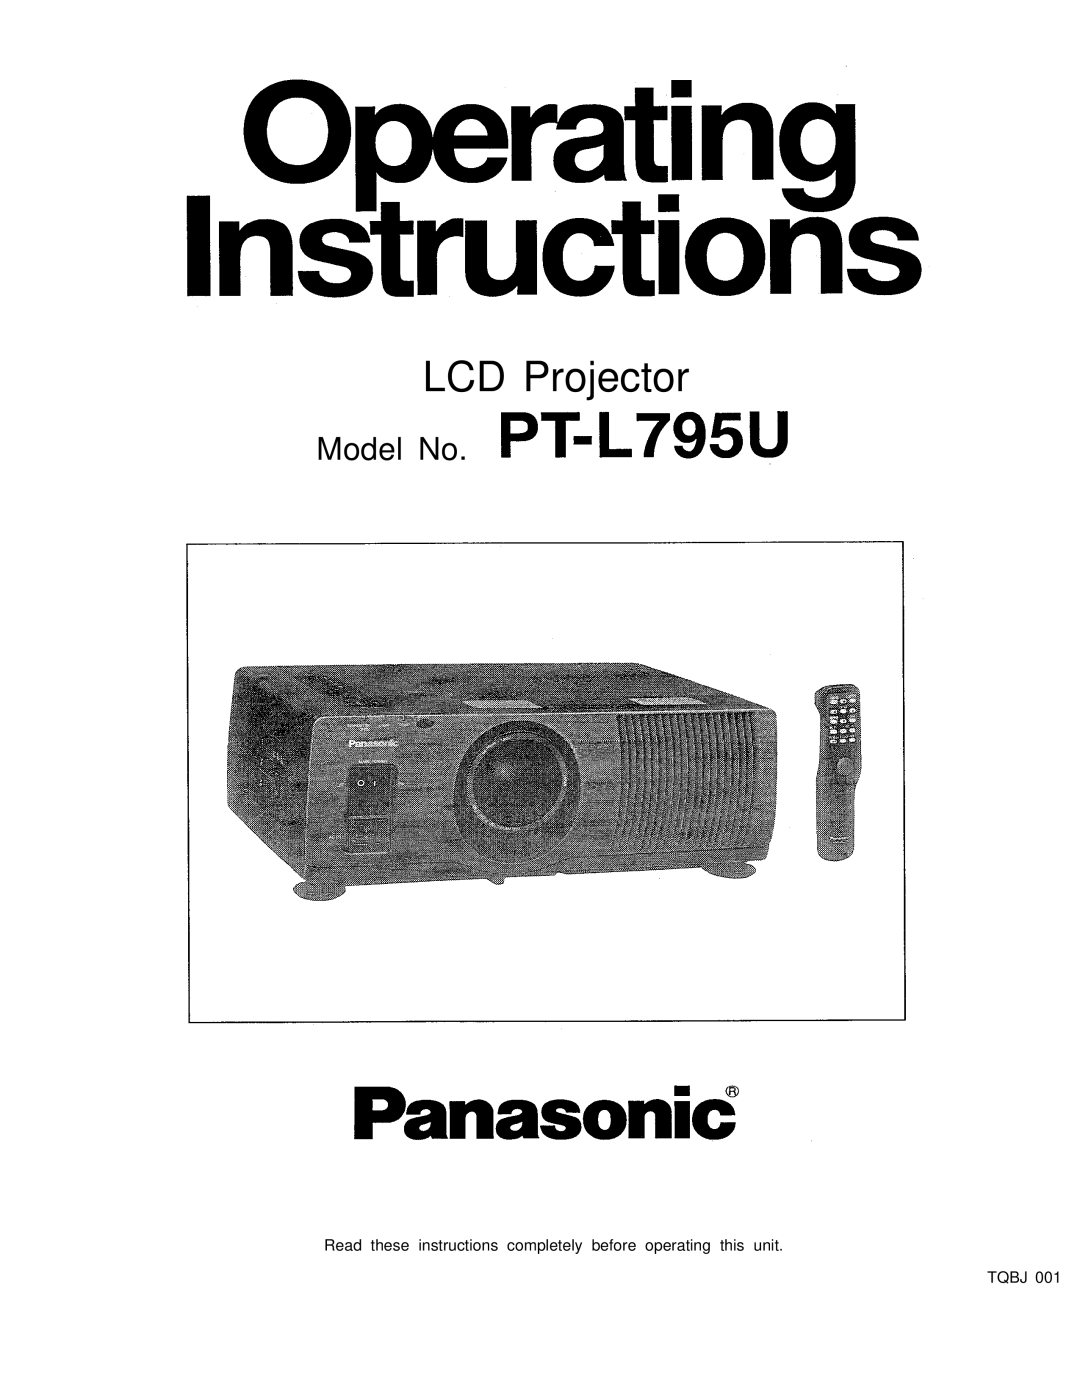 Panasonic PT-L795U manual LCD Projector, Model No, Read these instructions completely before operating this unit TQBJ 